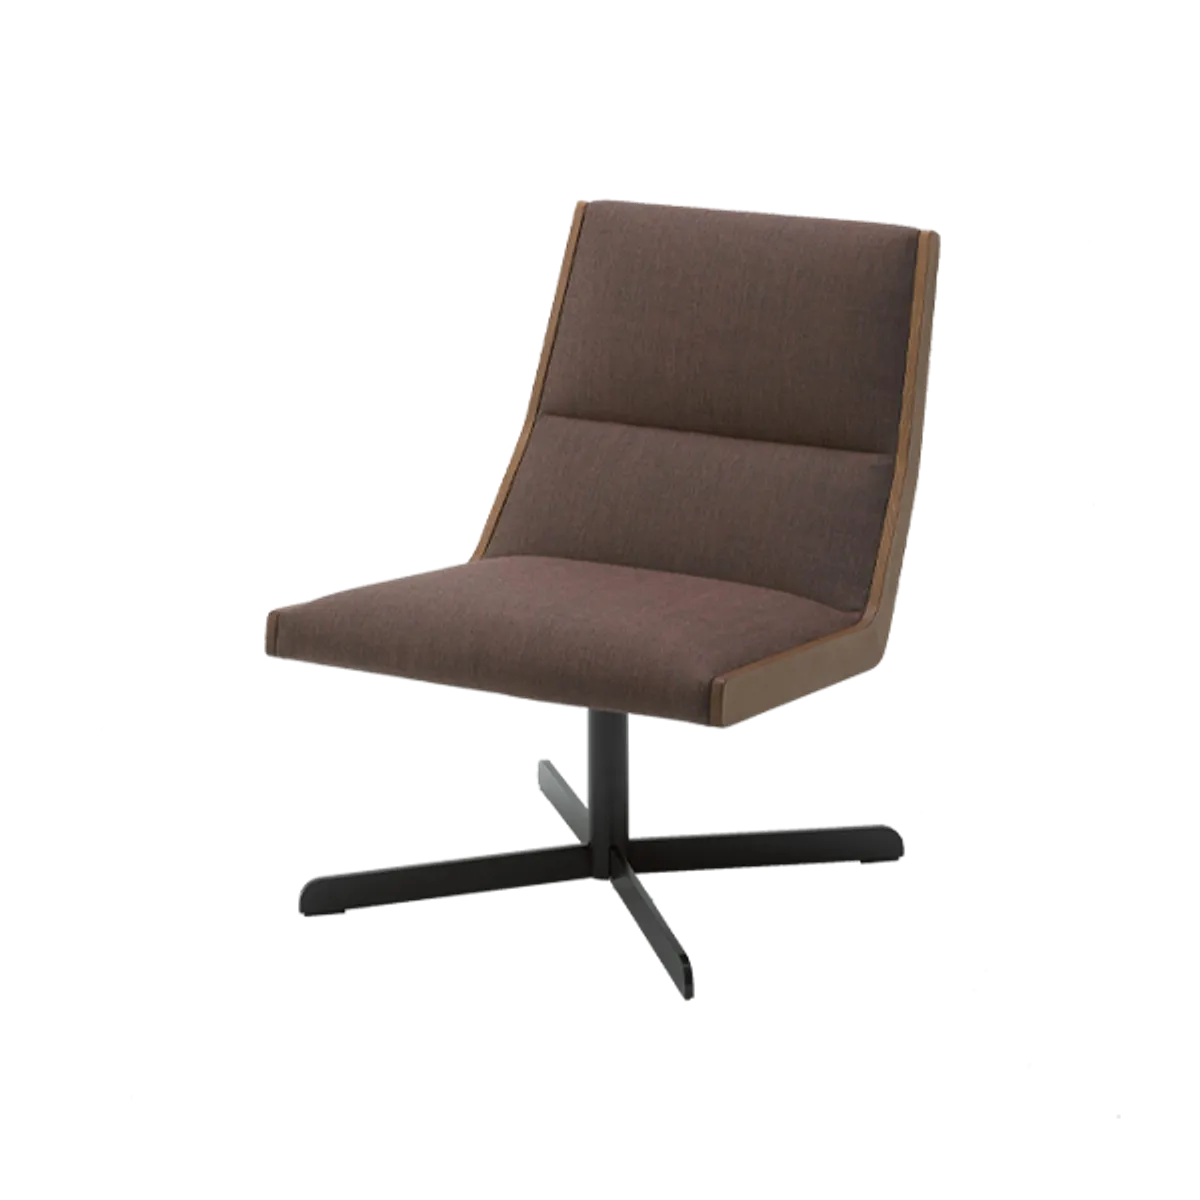 Stilo Swivel Lounge Chair Inside Out Contracts